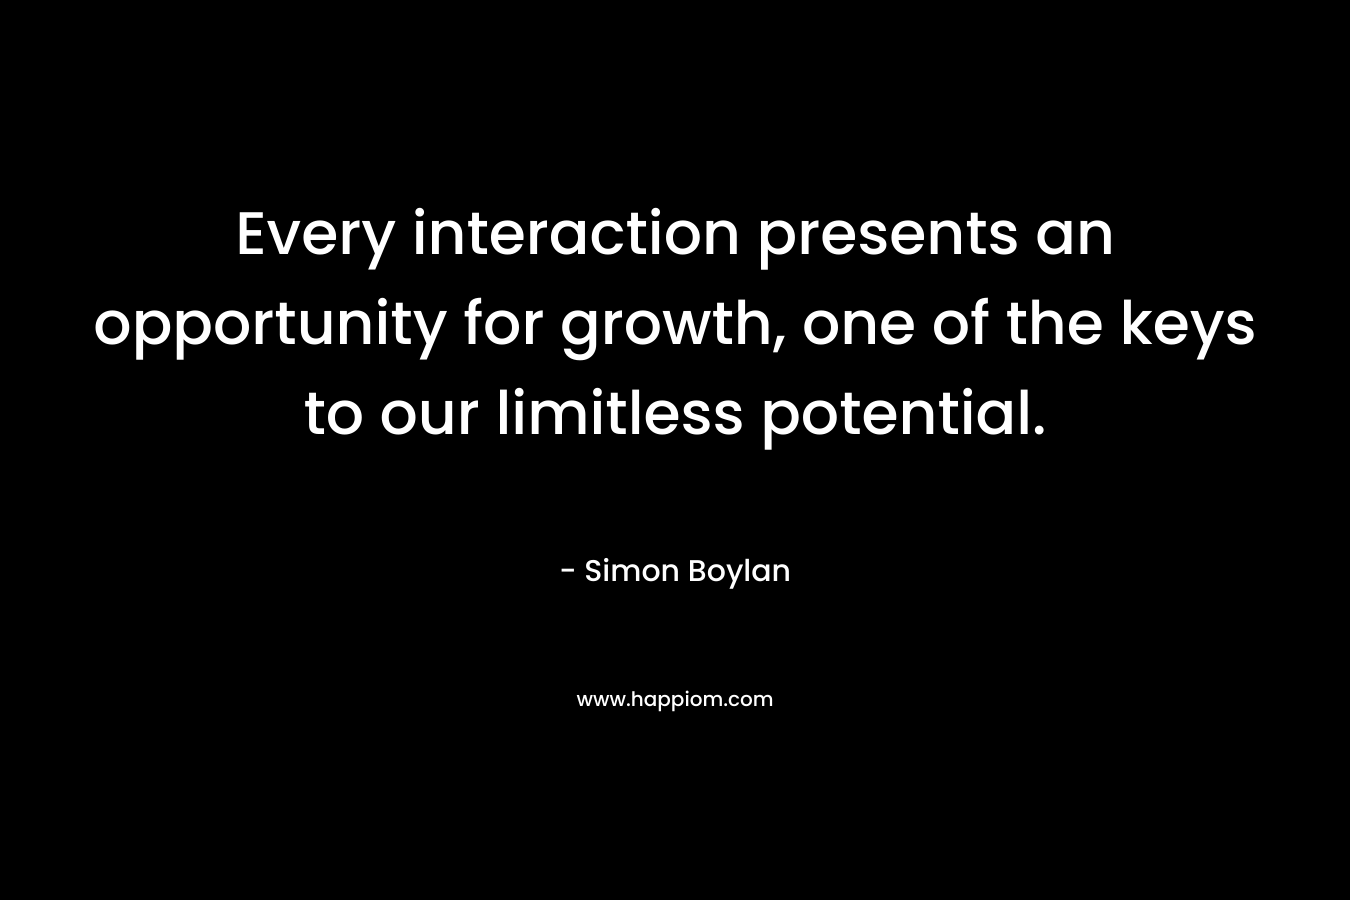 Every interaction presents an opportunity for growth, one of the keys to our limitless potential. – Simon Boylan